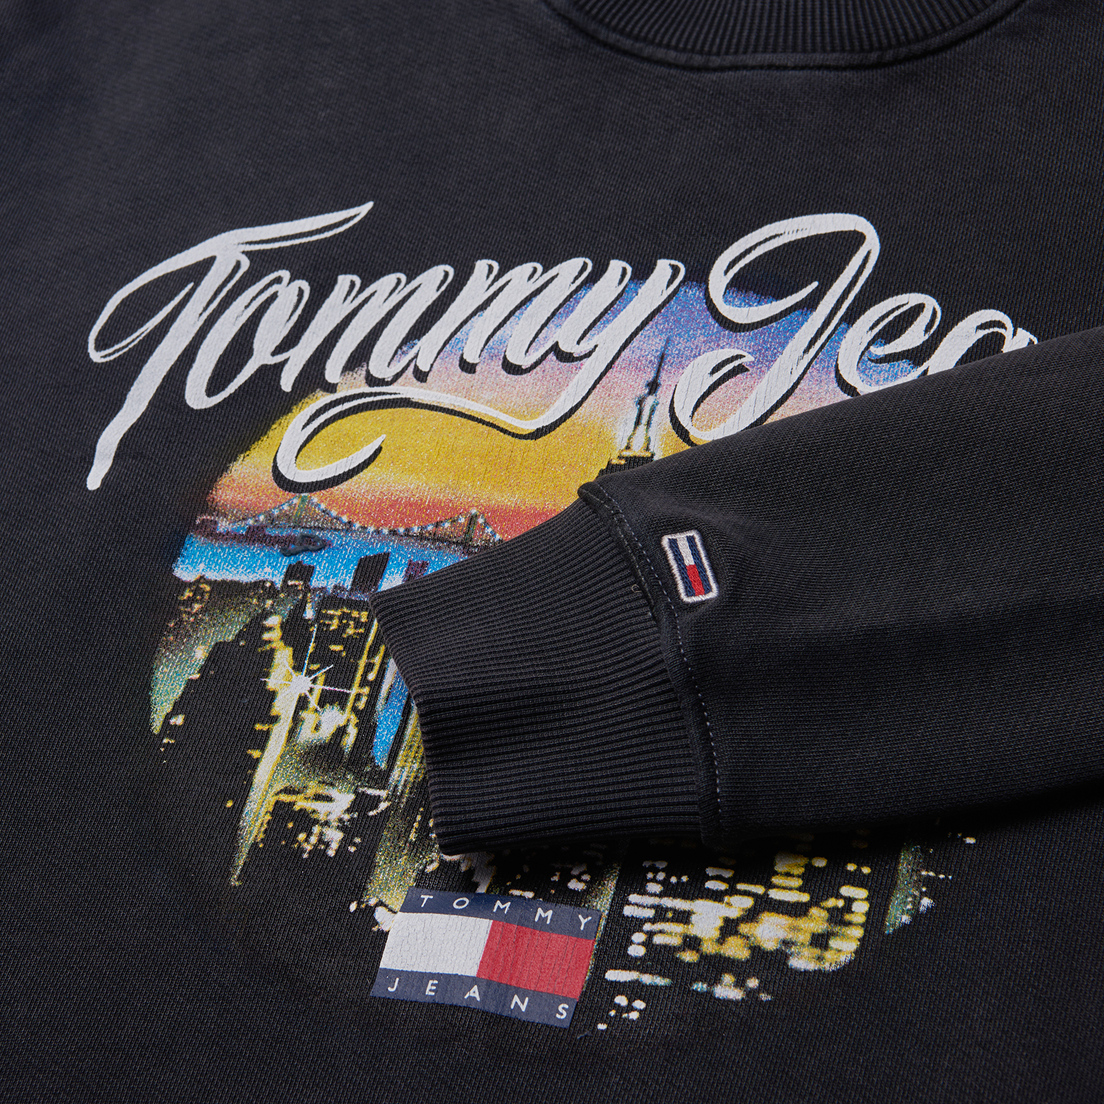 Tommy Jeans Женская толстовка Relaxed Vintage City Crew Neck